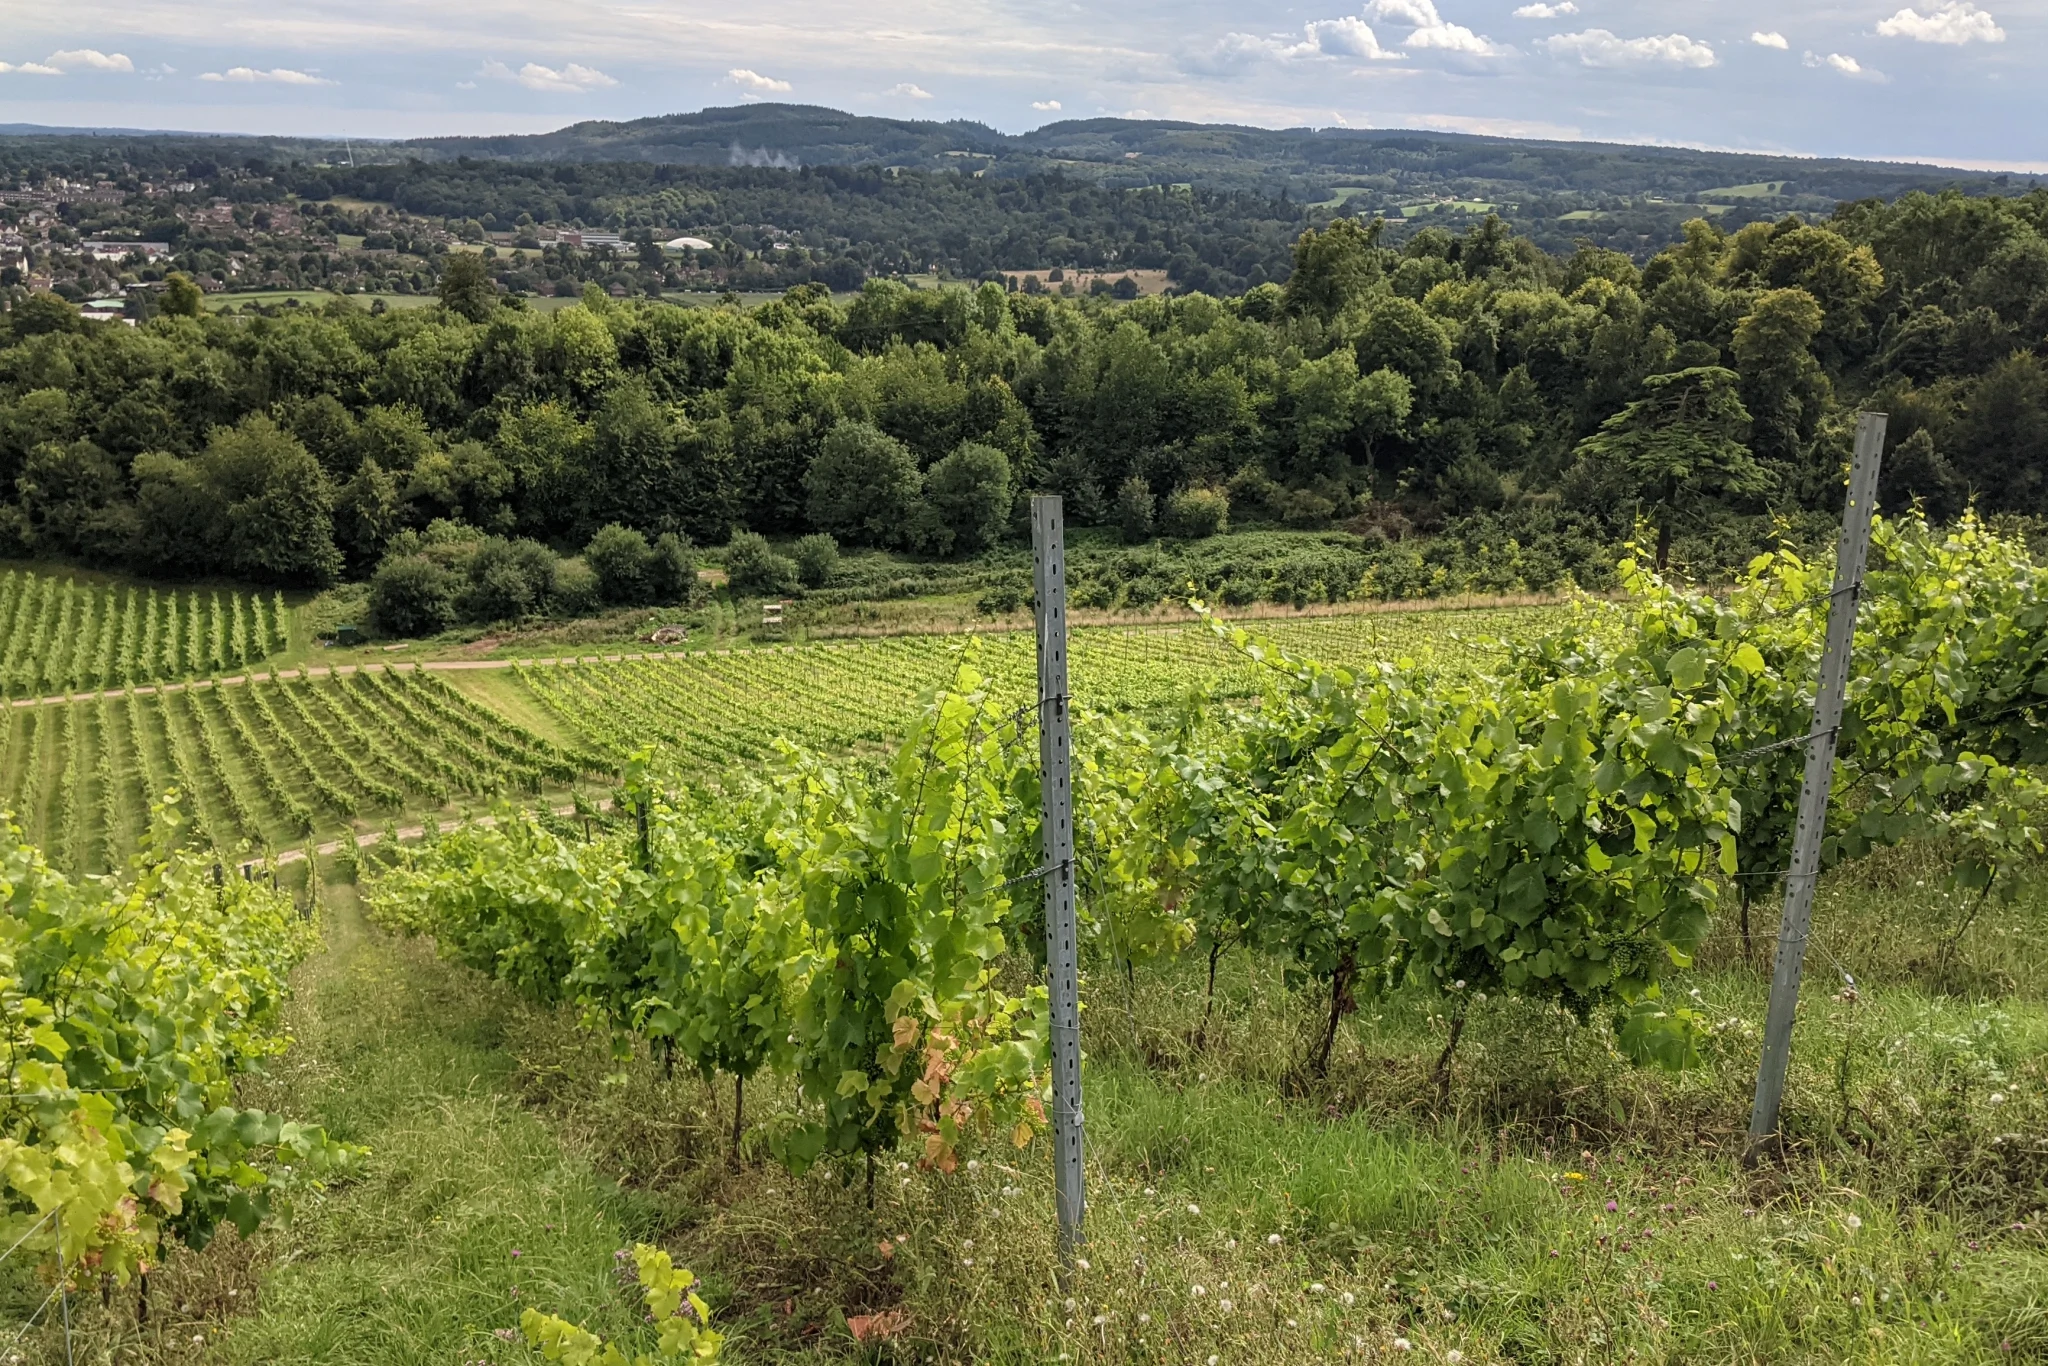 Rows of grape vines, trained along wires, stretch down the hill. In the
distance is a small wood, a settlement, and mostly trees and hills to the
horizon.